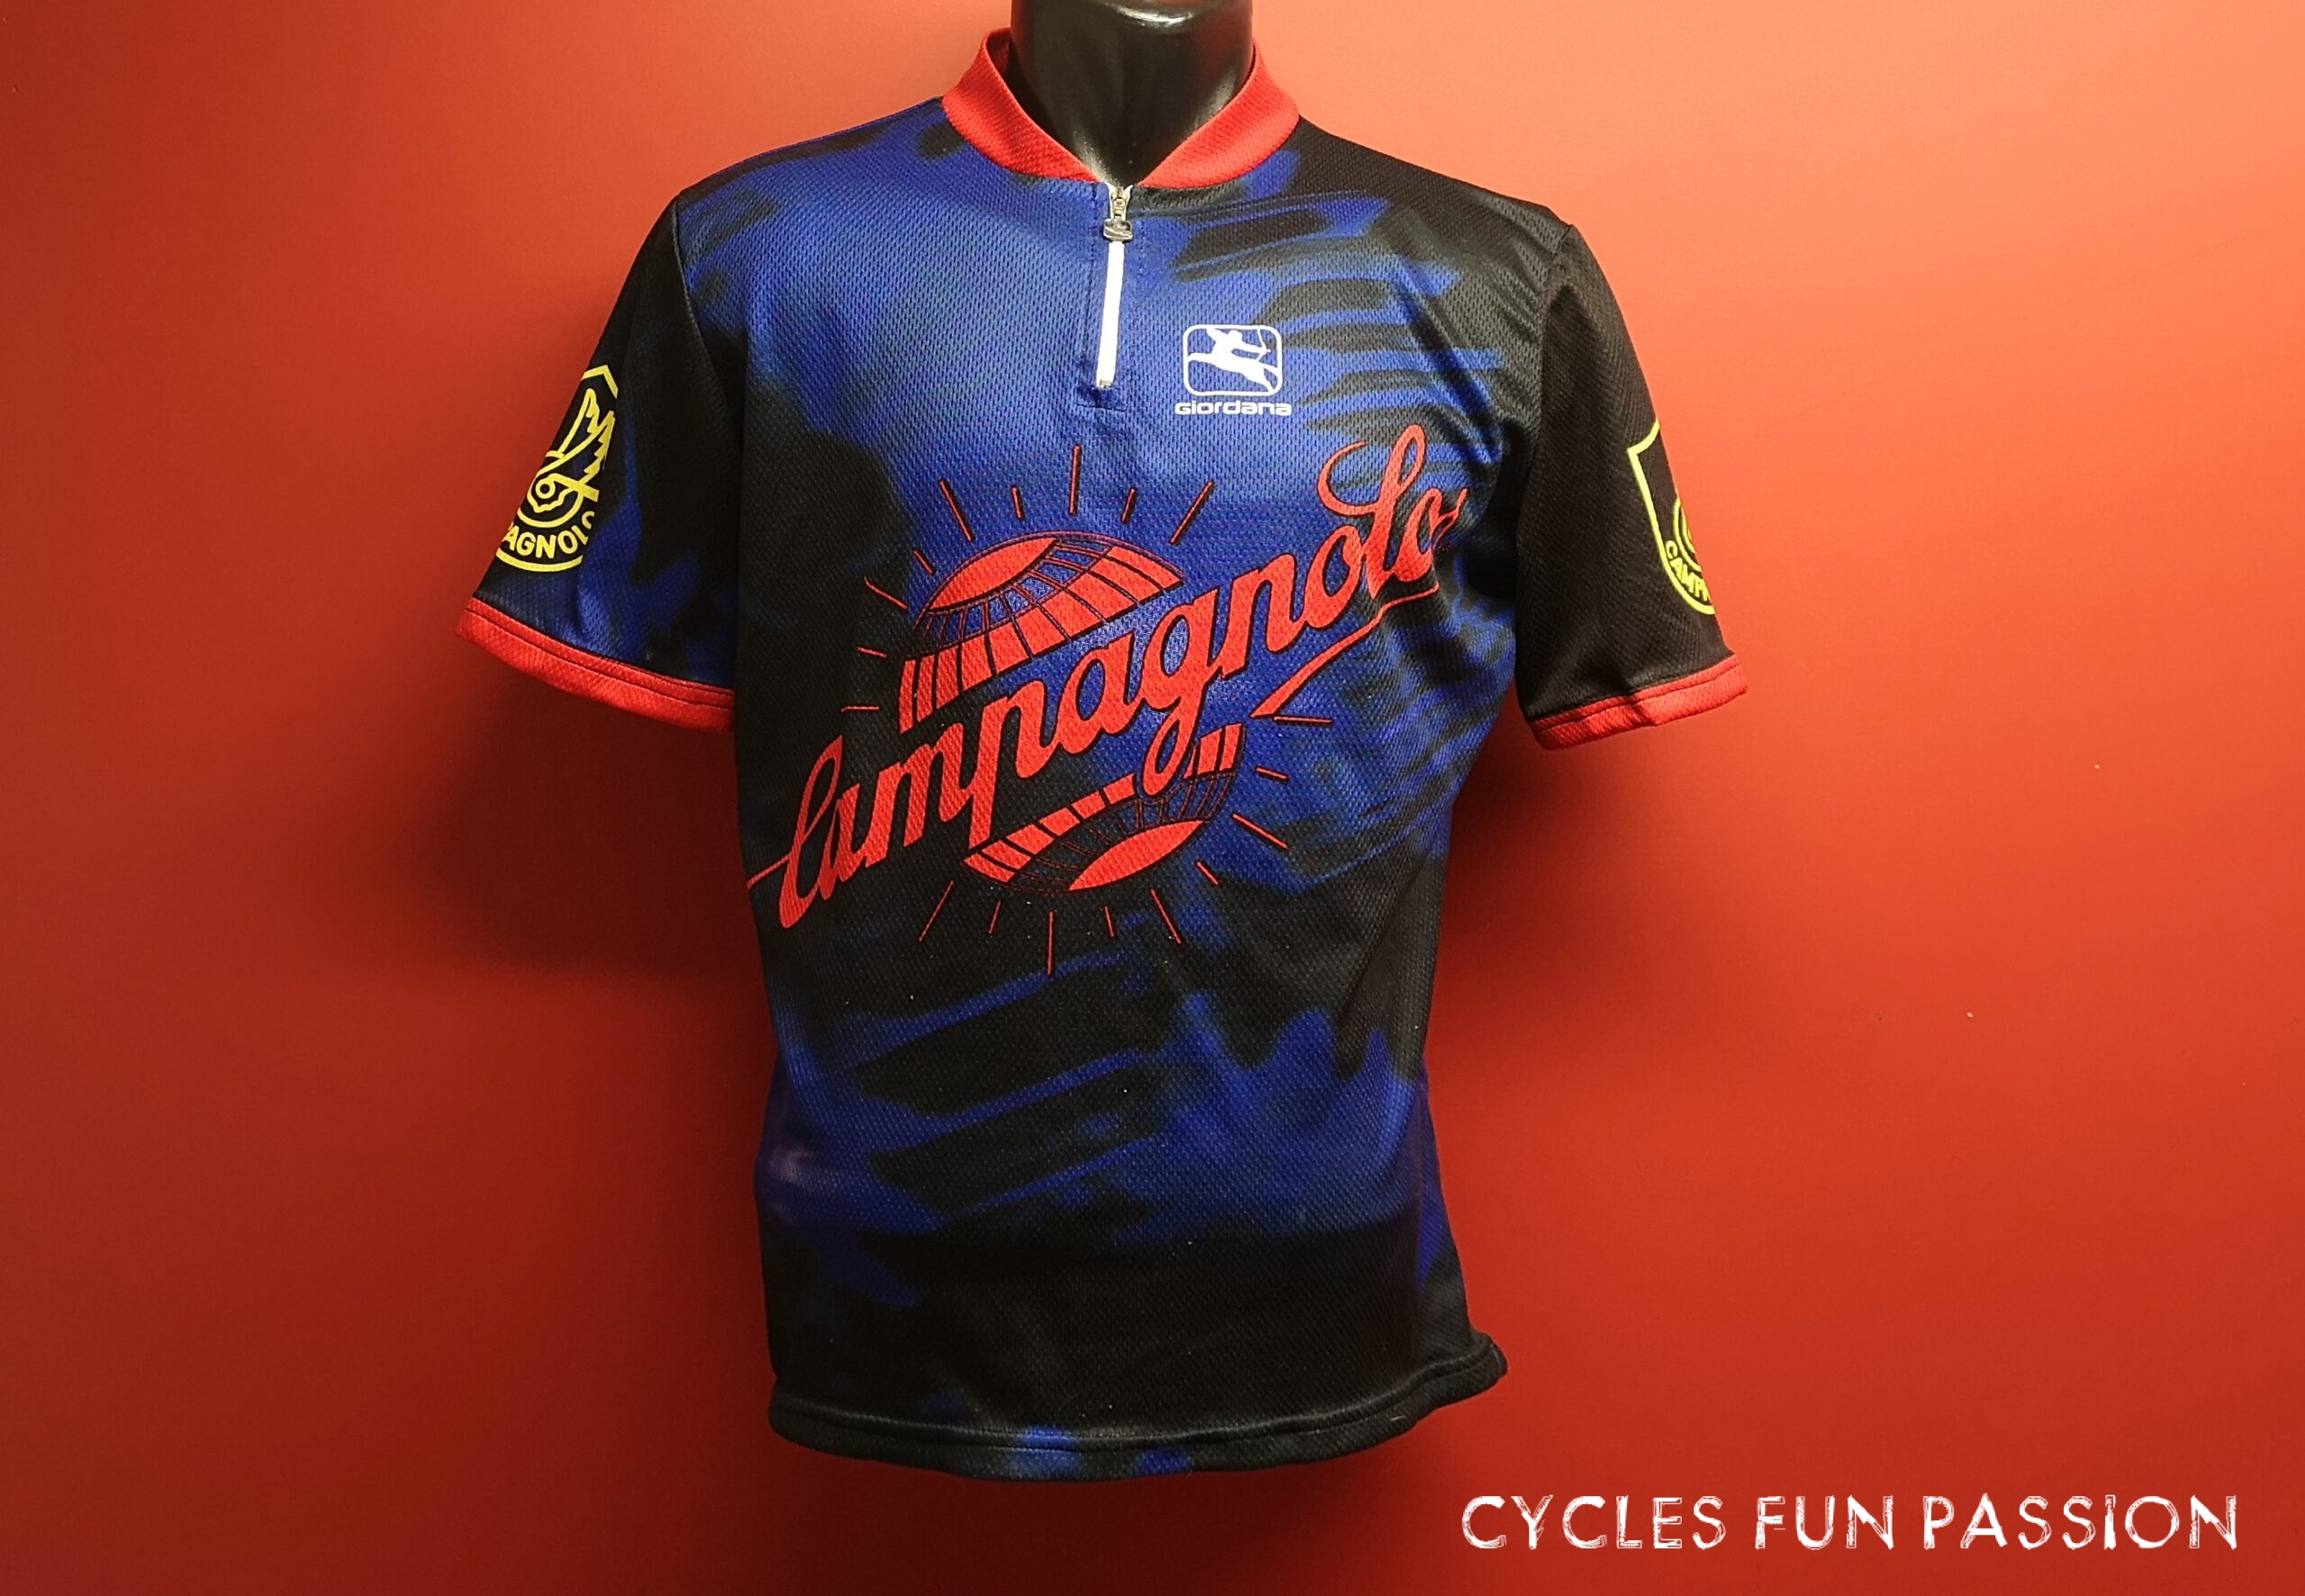 https://cycles-fun-passion.com/wp-content/uploads/2023/11/Maillot-cycliste-Jersey-CAMPAGNOLO-vintage-road-bike-velo-bicyclette-Randonneuse-piece-cycles-fun-passion-ancien-ref33vt-1-scaled.jpg